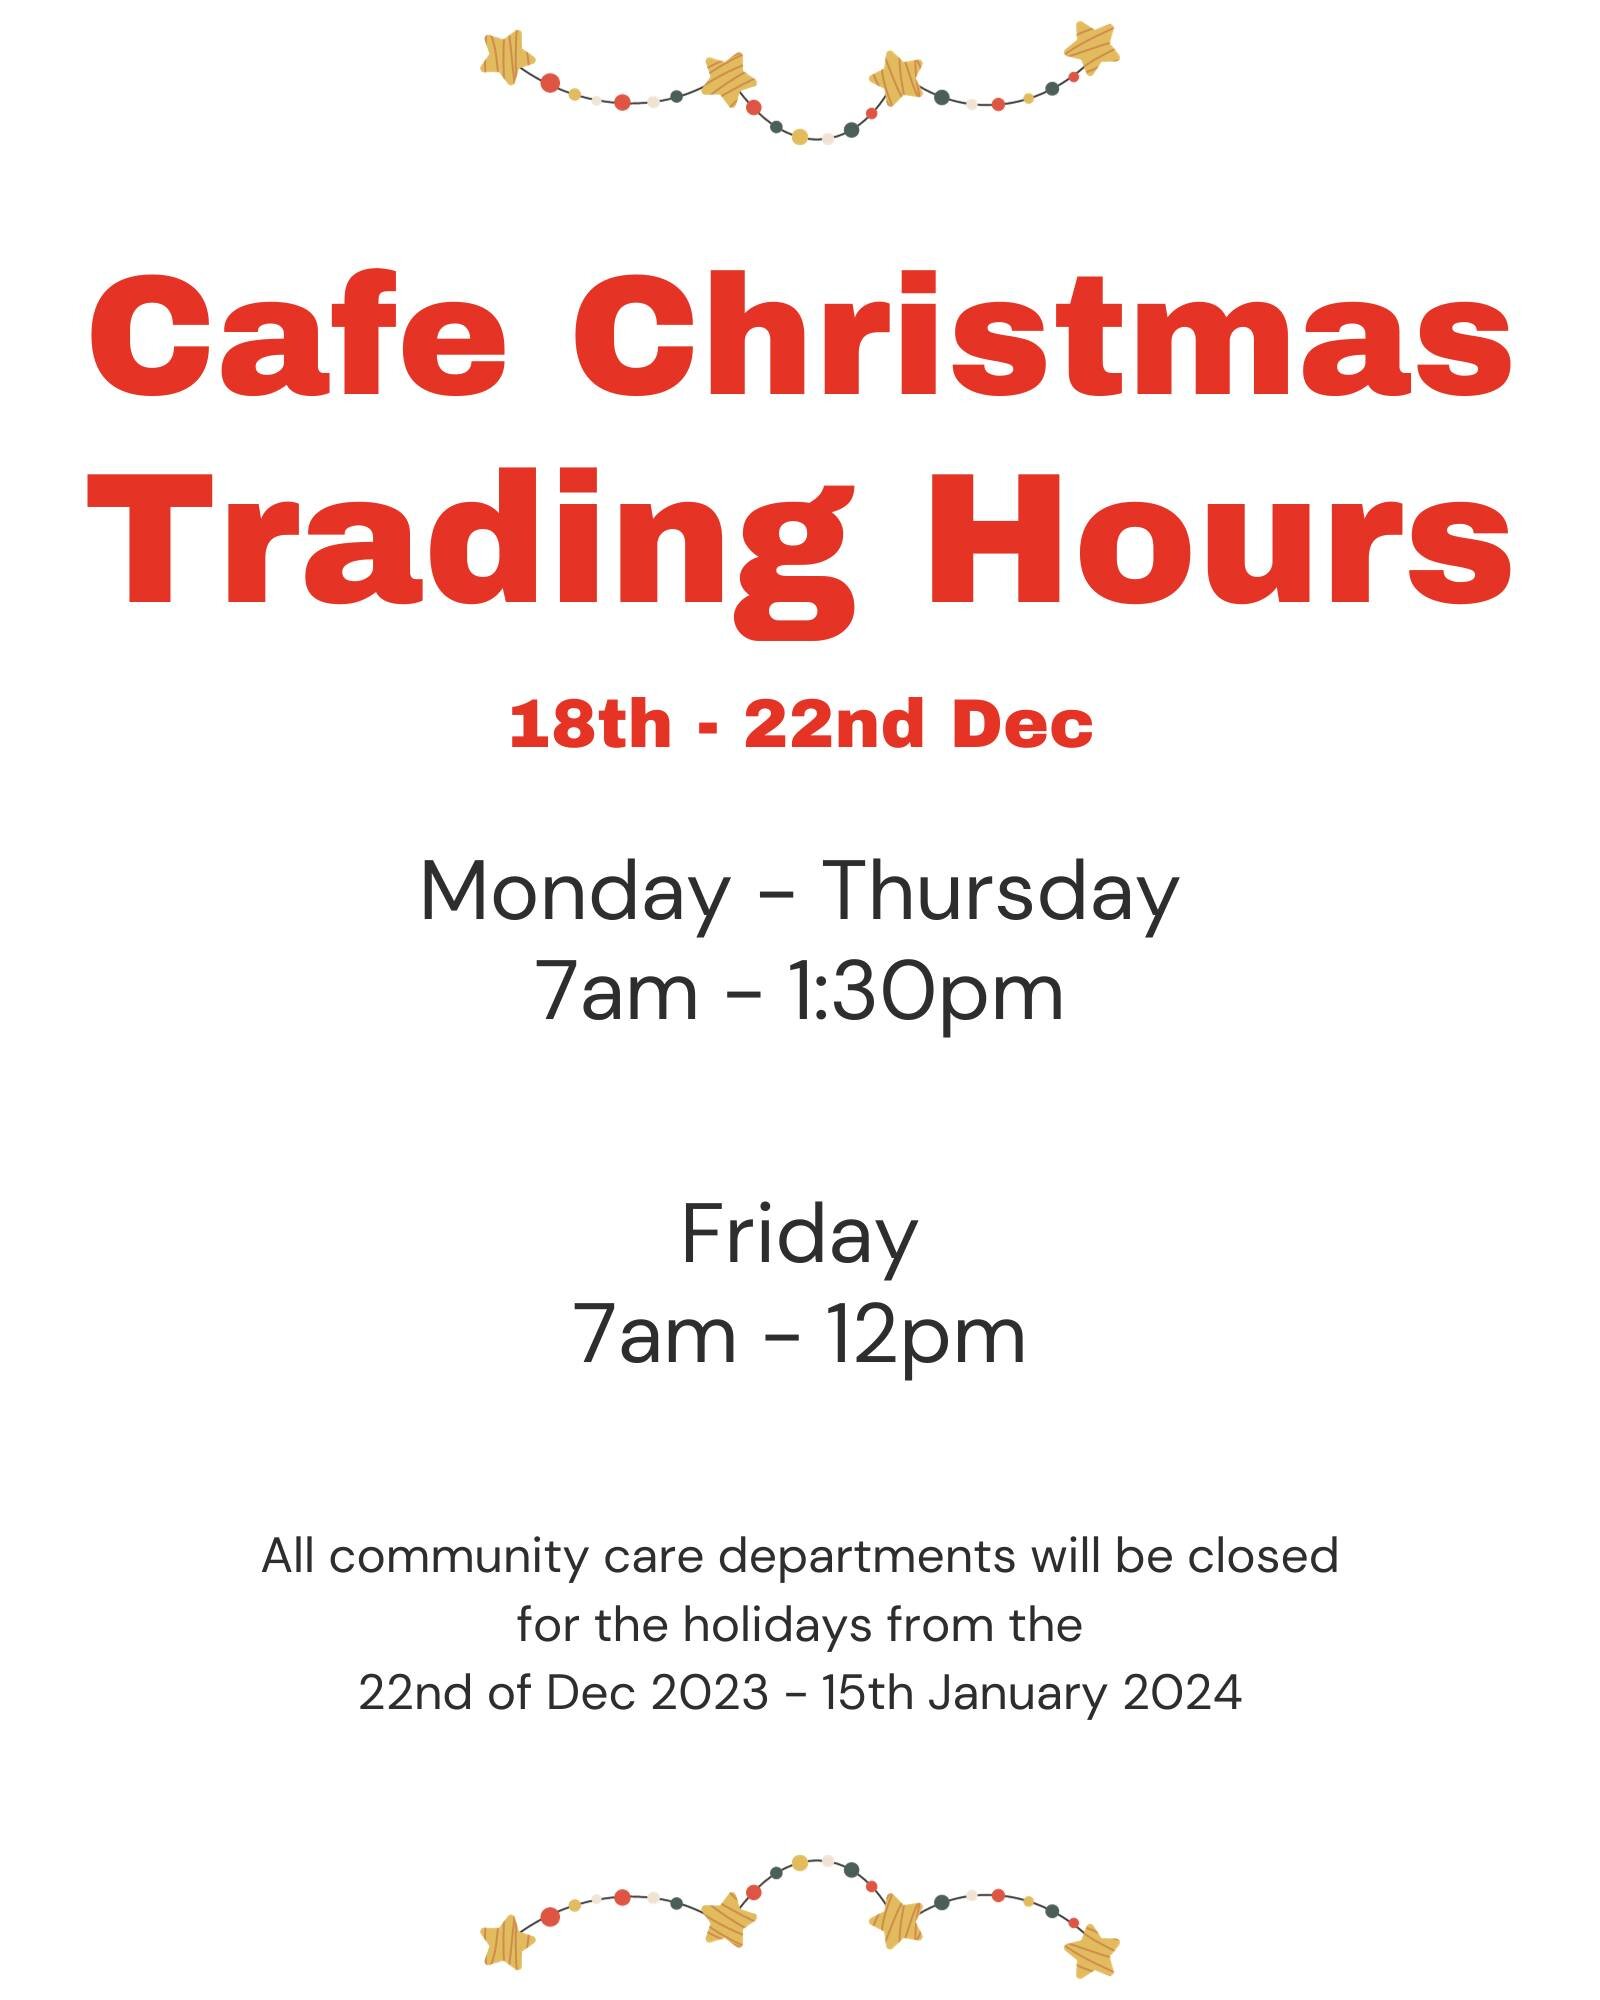 ATTENTION ALL COFFEE LOVERS ☕️ We have some amended hours for the week leading into Christmas, so make sure you double check them. We'll see you for lunch very soon